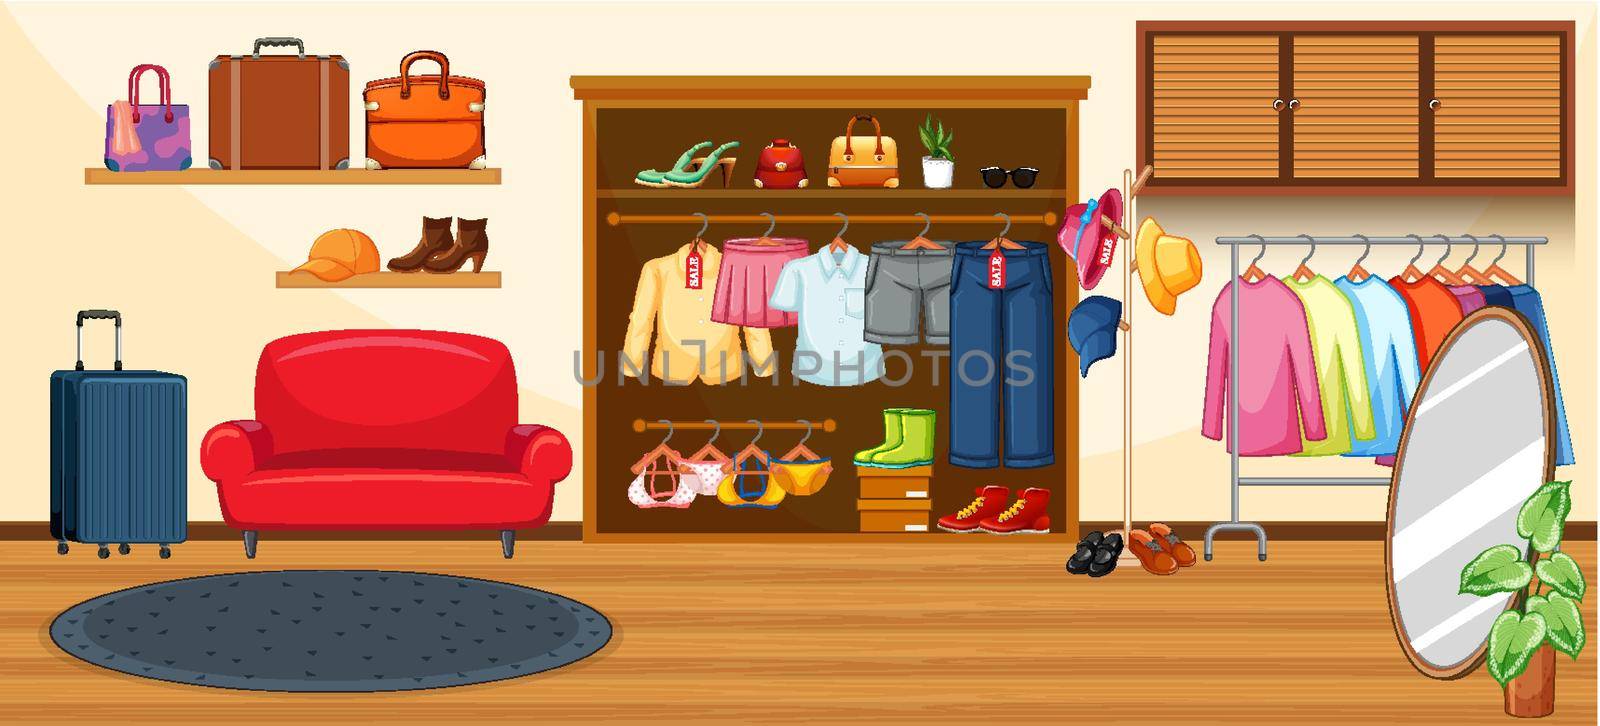 Fashion clothes store background by iimages